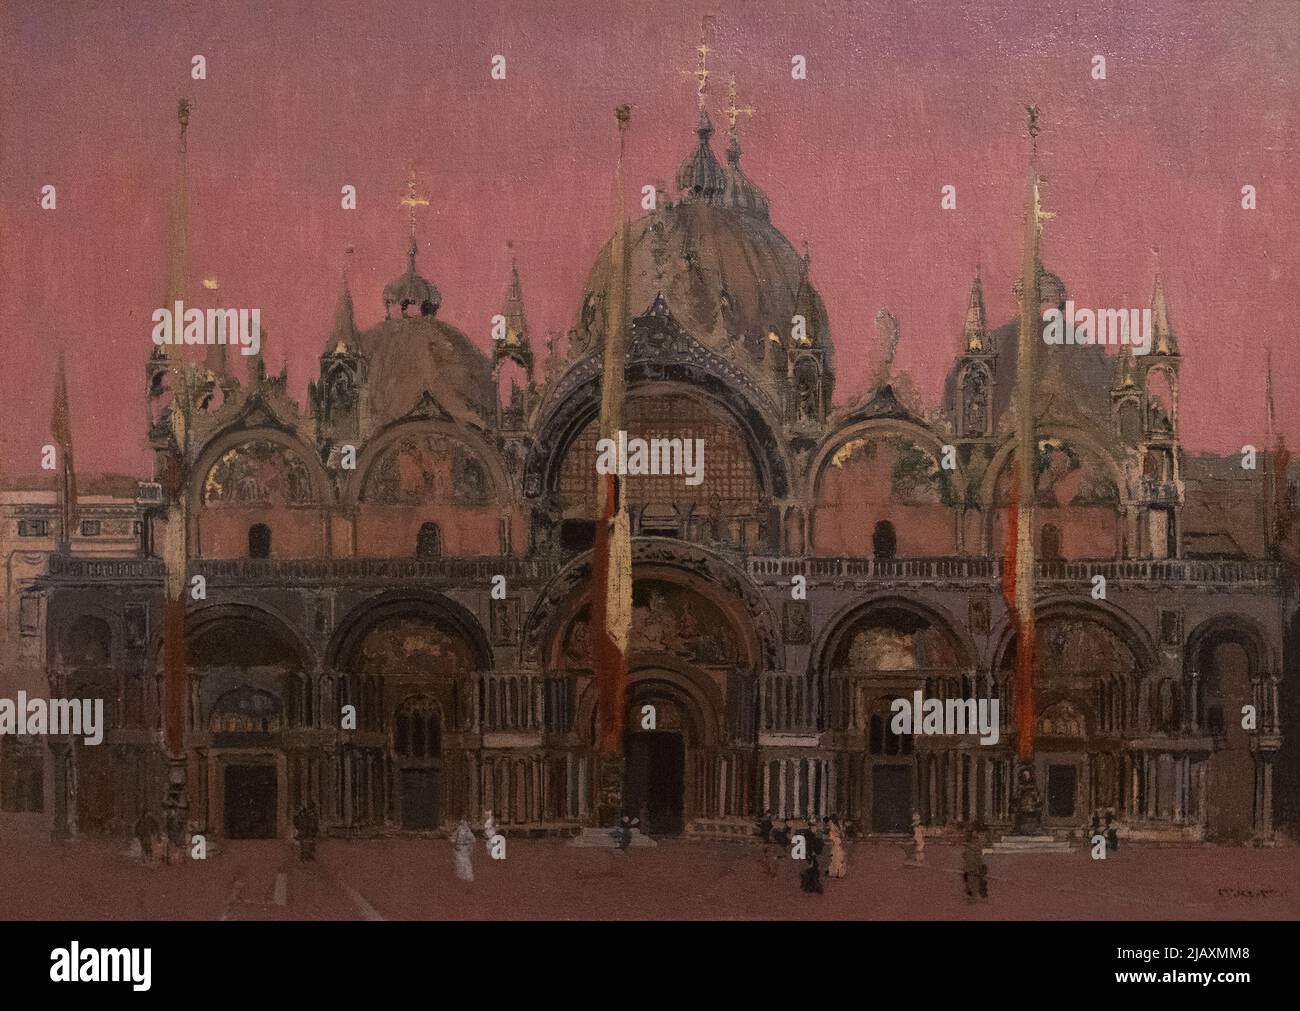 Walter Sickert painting; ' The Facade of St. Marks - Red Sky at Night ', 1895. Oil on canvas, 19th century Post impressionist british painters. Stock Photo